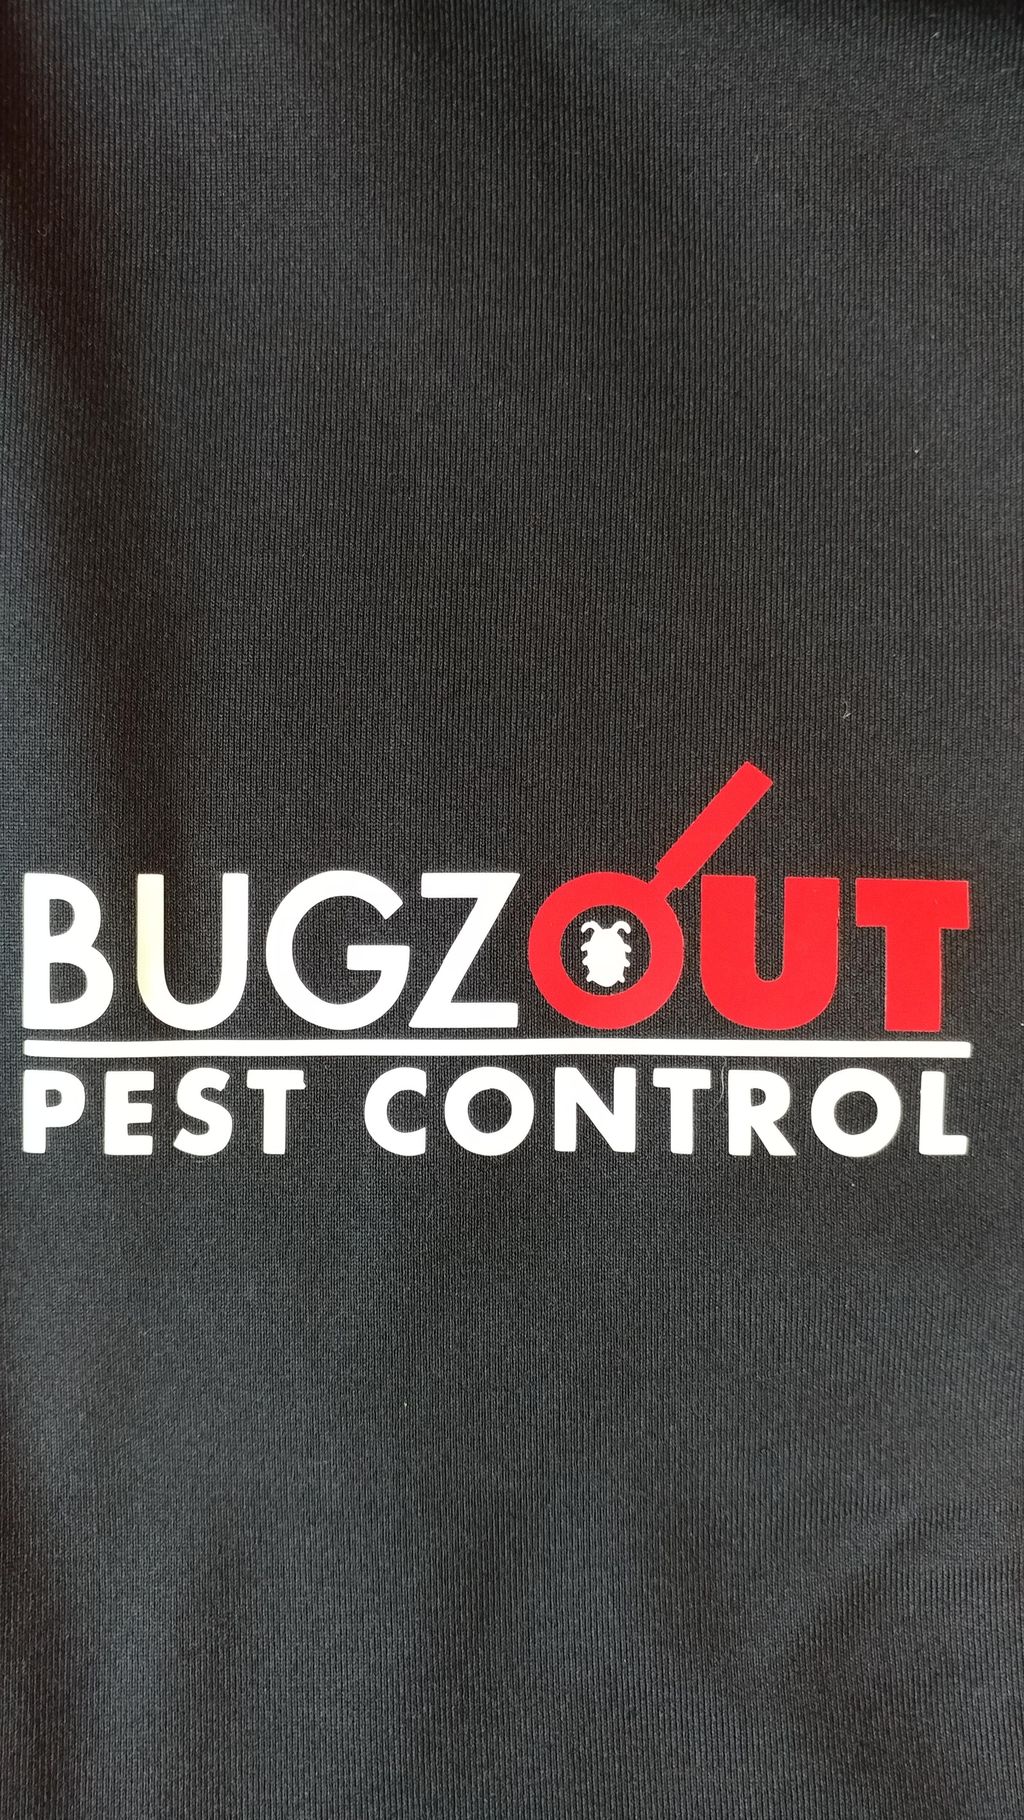 Bugzout Pest and Termite Control LLC